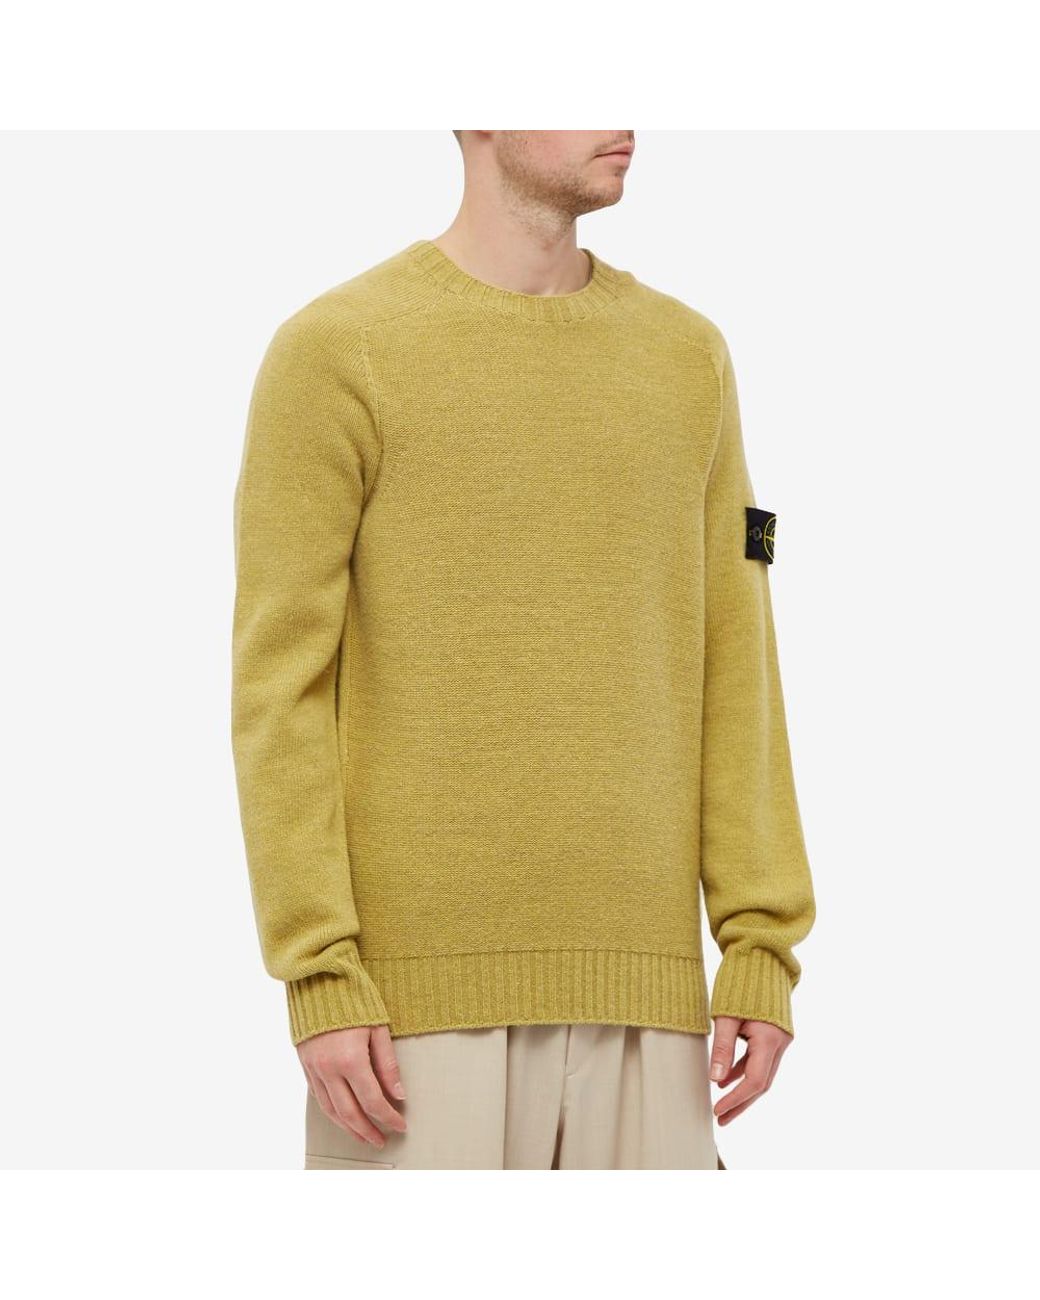 Stone Island Lambswool Crew Knit for Men | Lyst